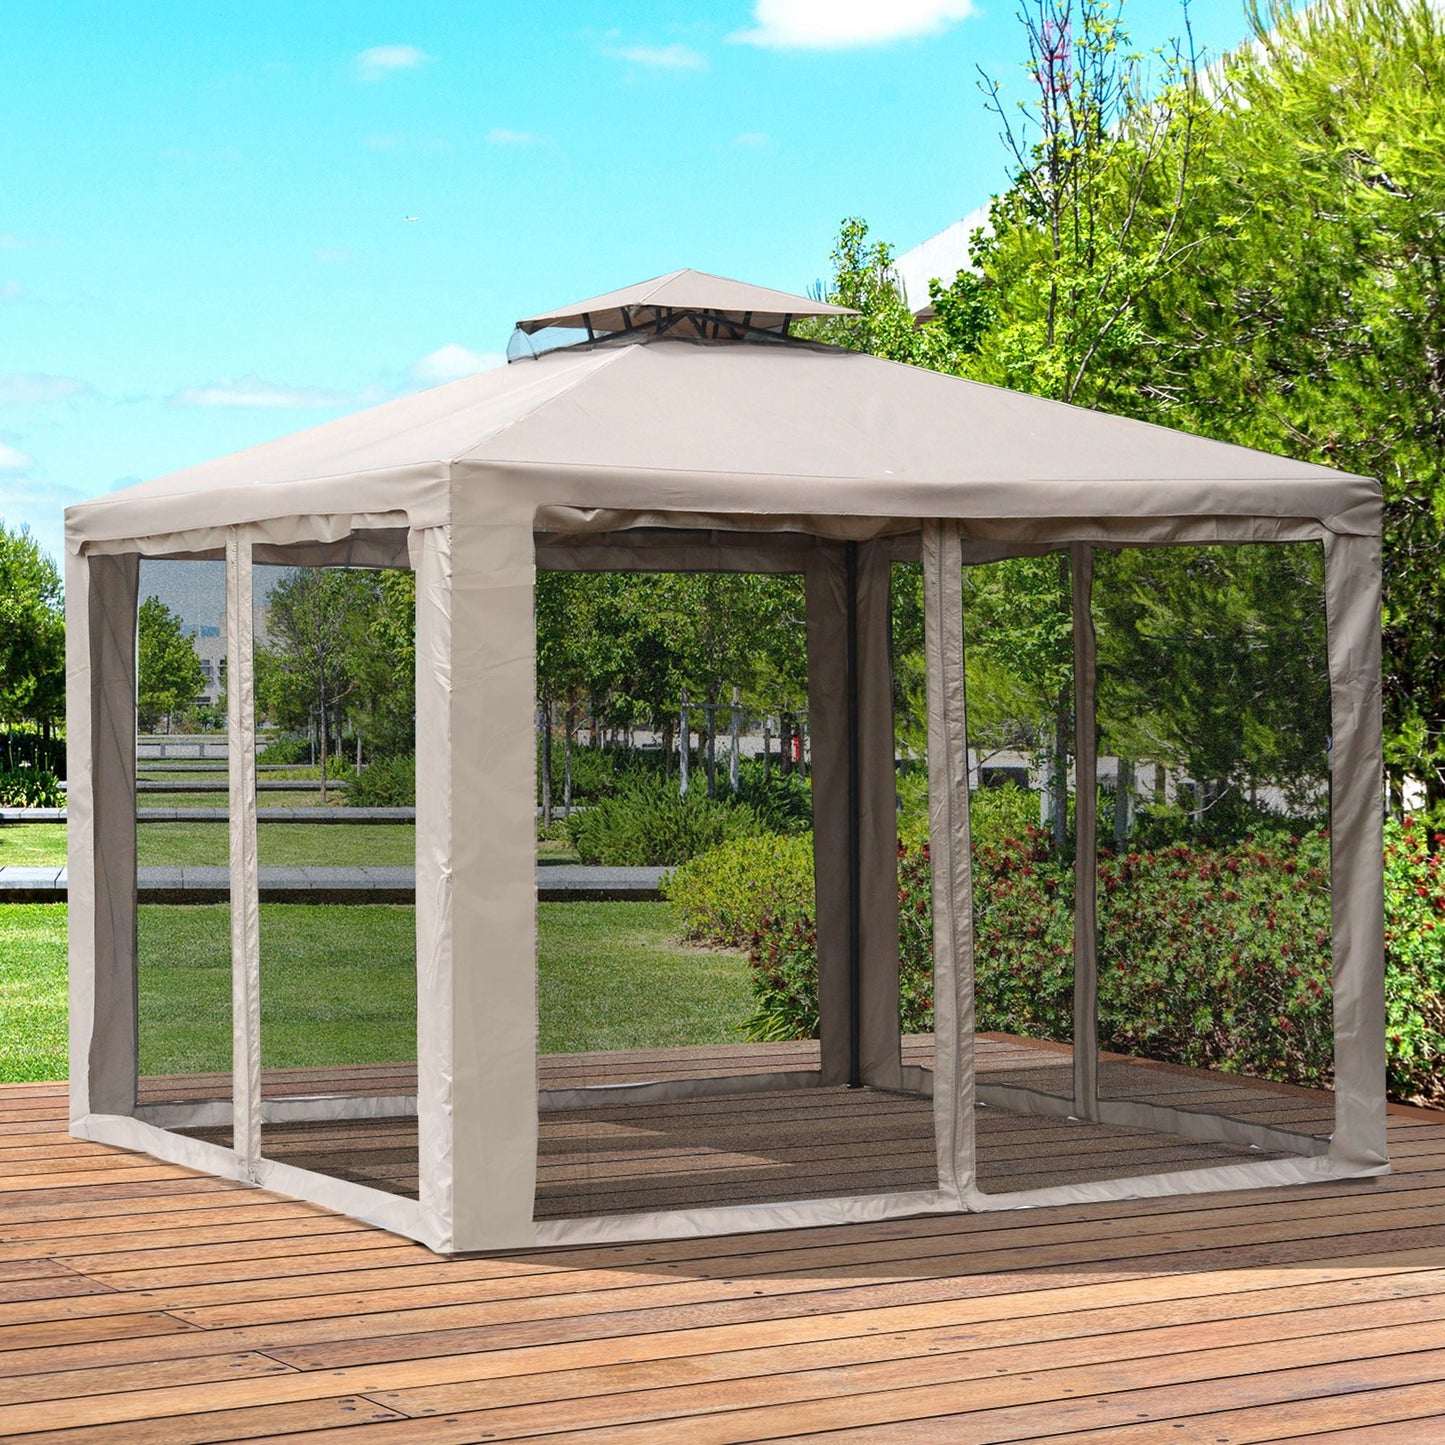 -Outsunny 10' x 10' Gazebo Tent, Canopy with Mosquito Netting SideWalls, 2-Tier Vented Roof, Fabric for Garden, Lawn, Backyard, Taupe | Aosom.com - Outdoor Style Company